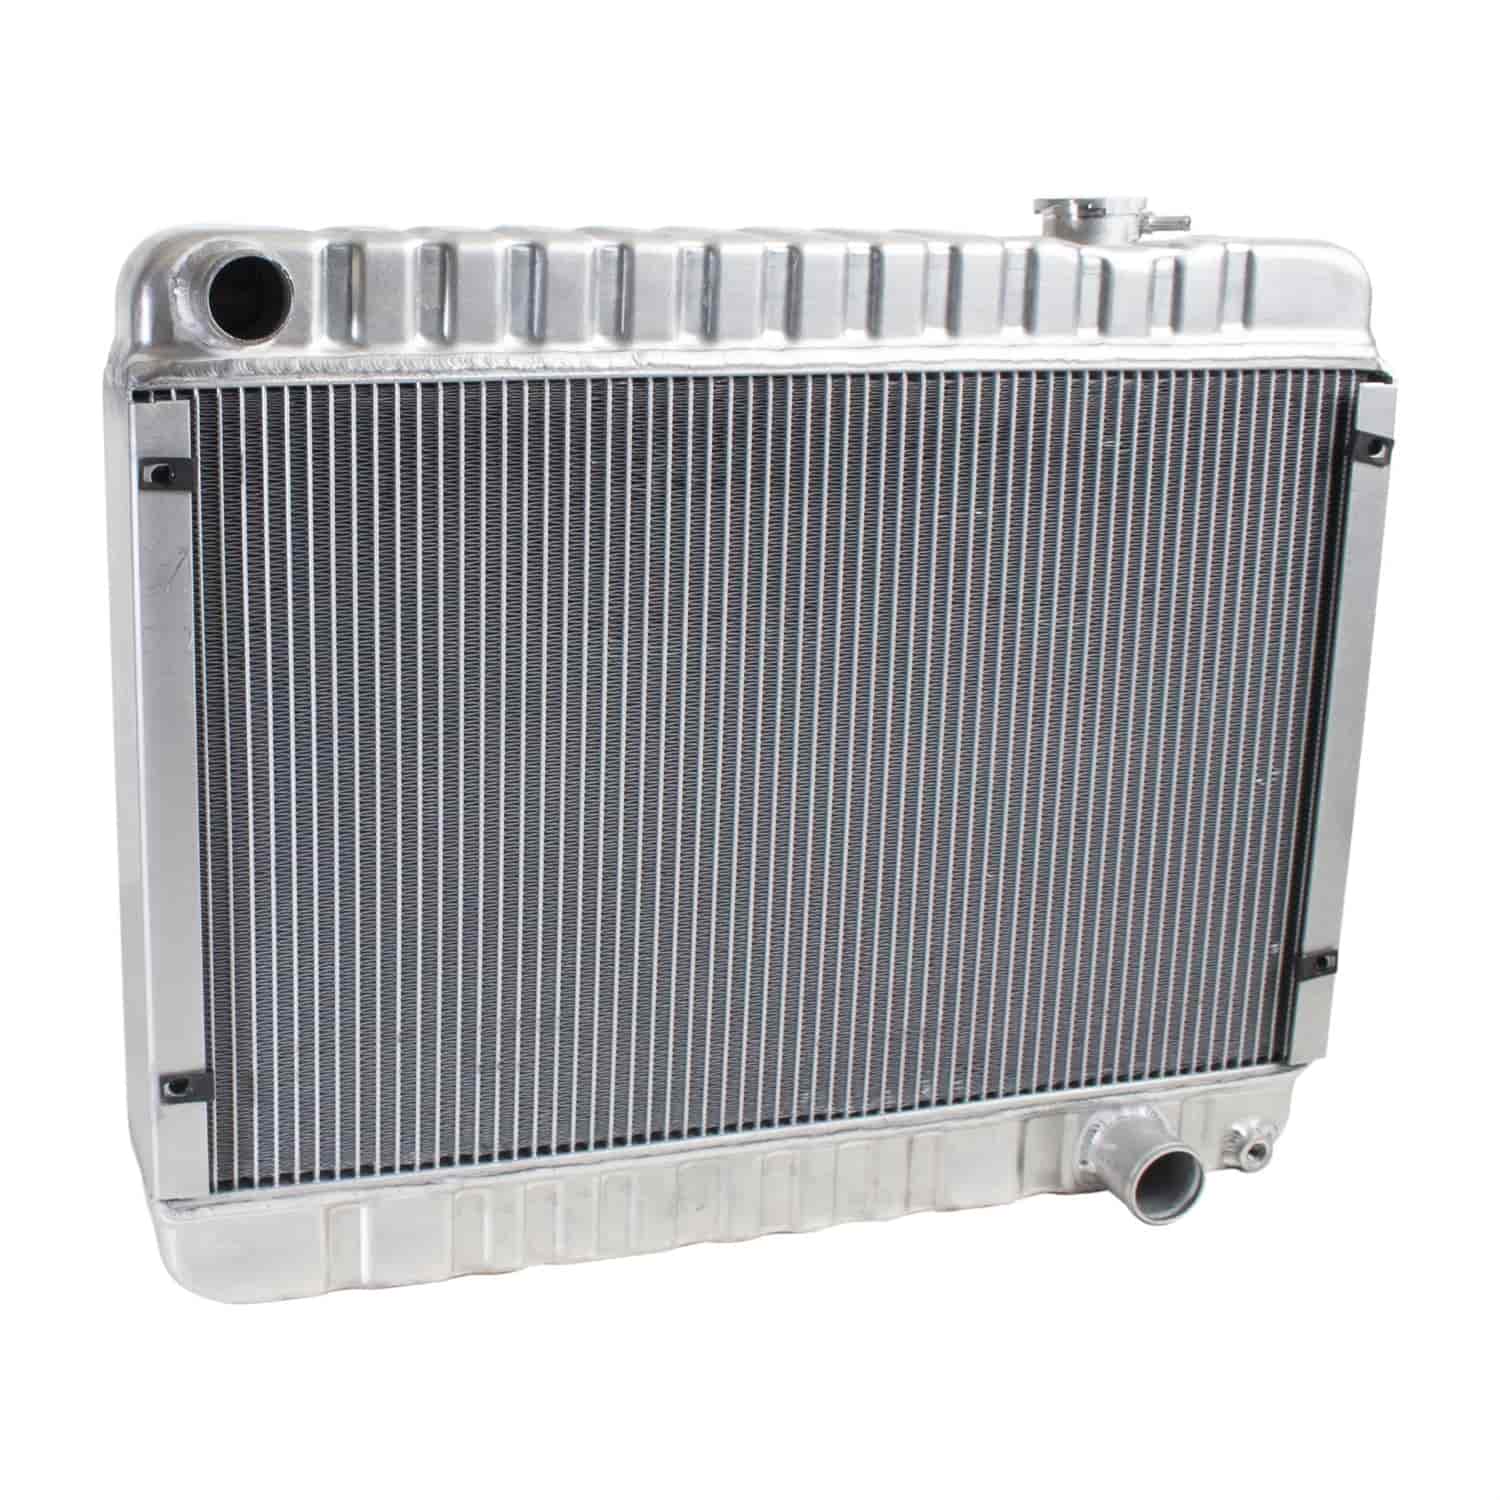 ExactFit Radiator for 1962-1967 Chevy II Non-Factory A/C Car